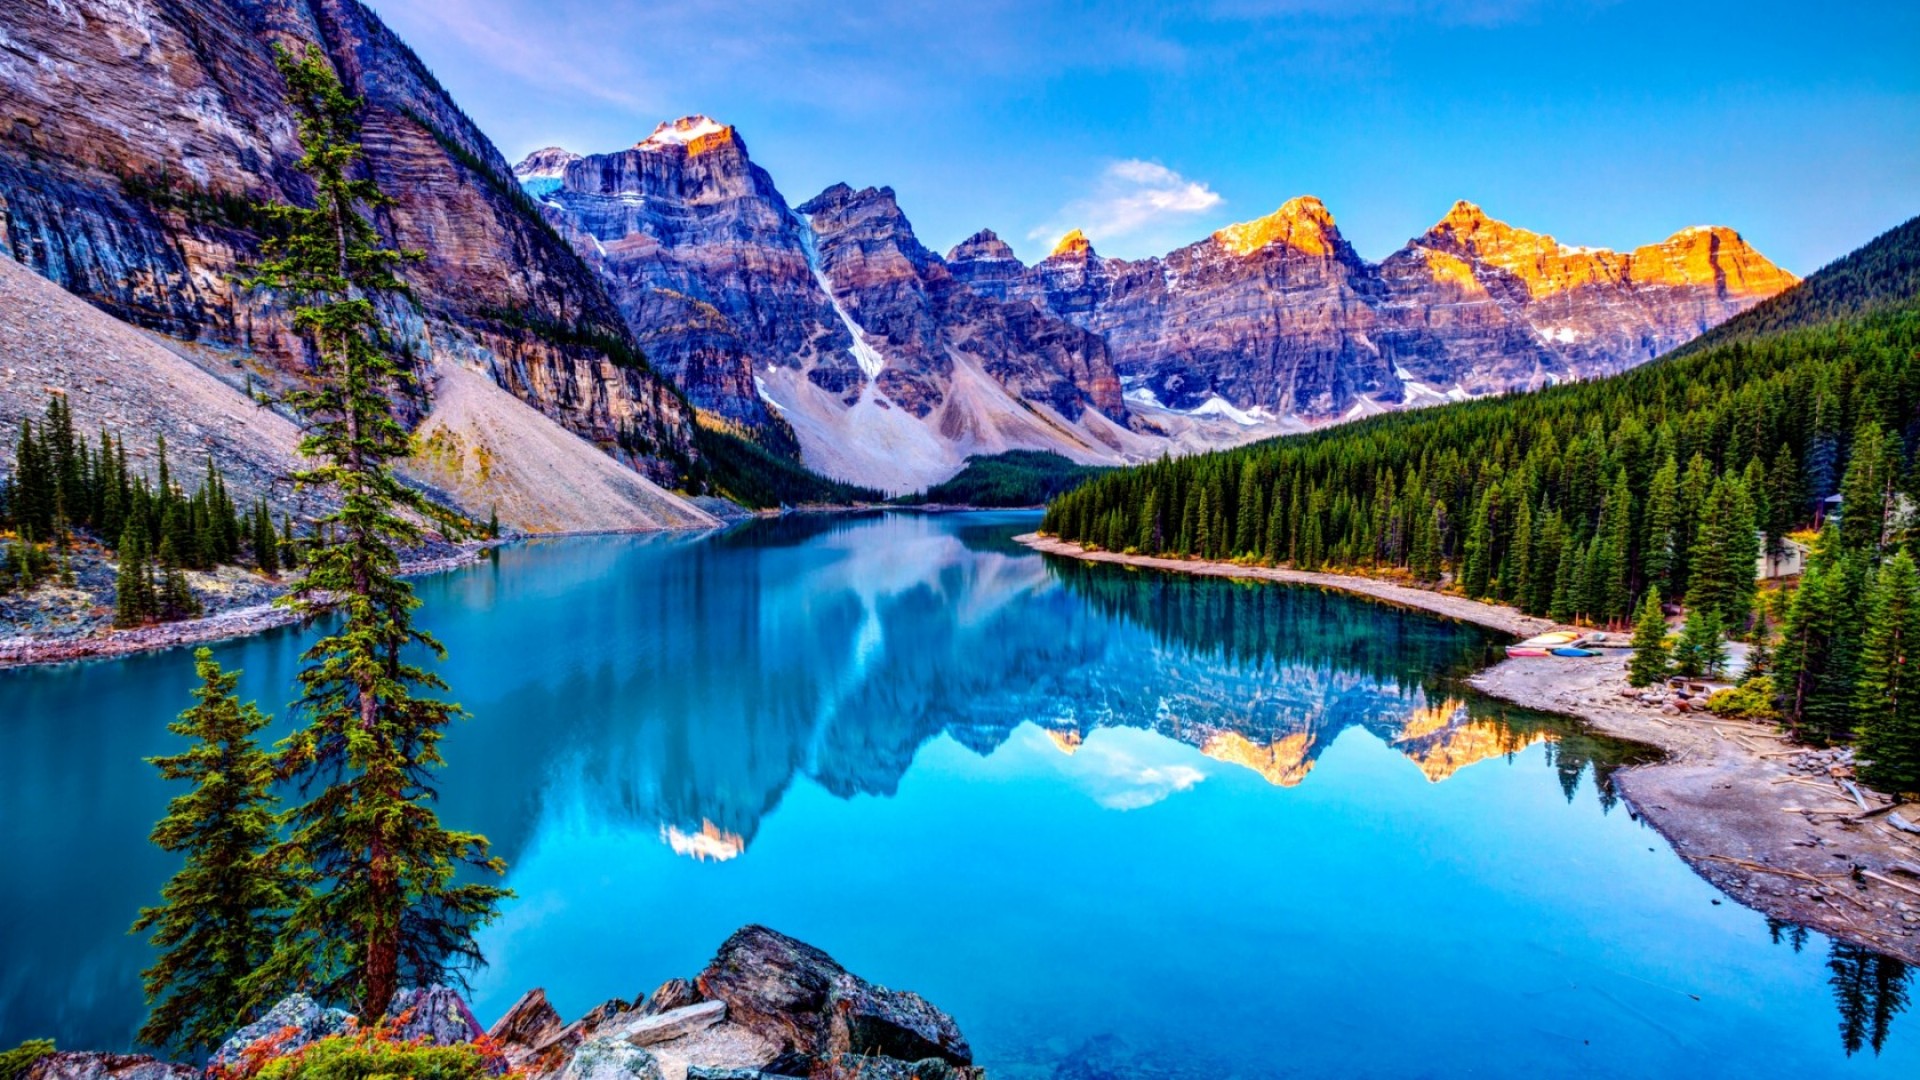 Hd Rocky Mountains Wallpapers Backgrounds Computer Desktop Pictures 1920x1080